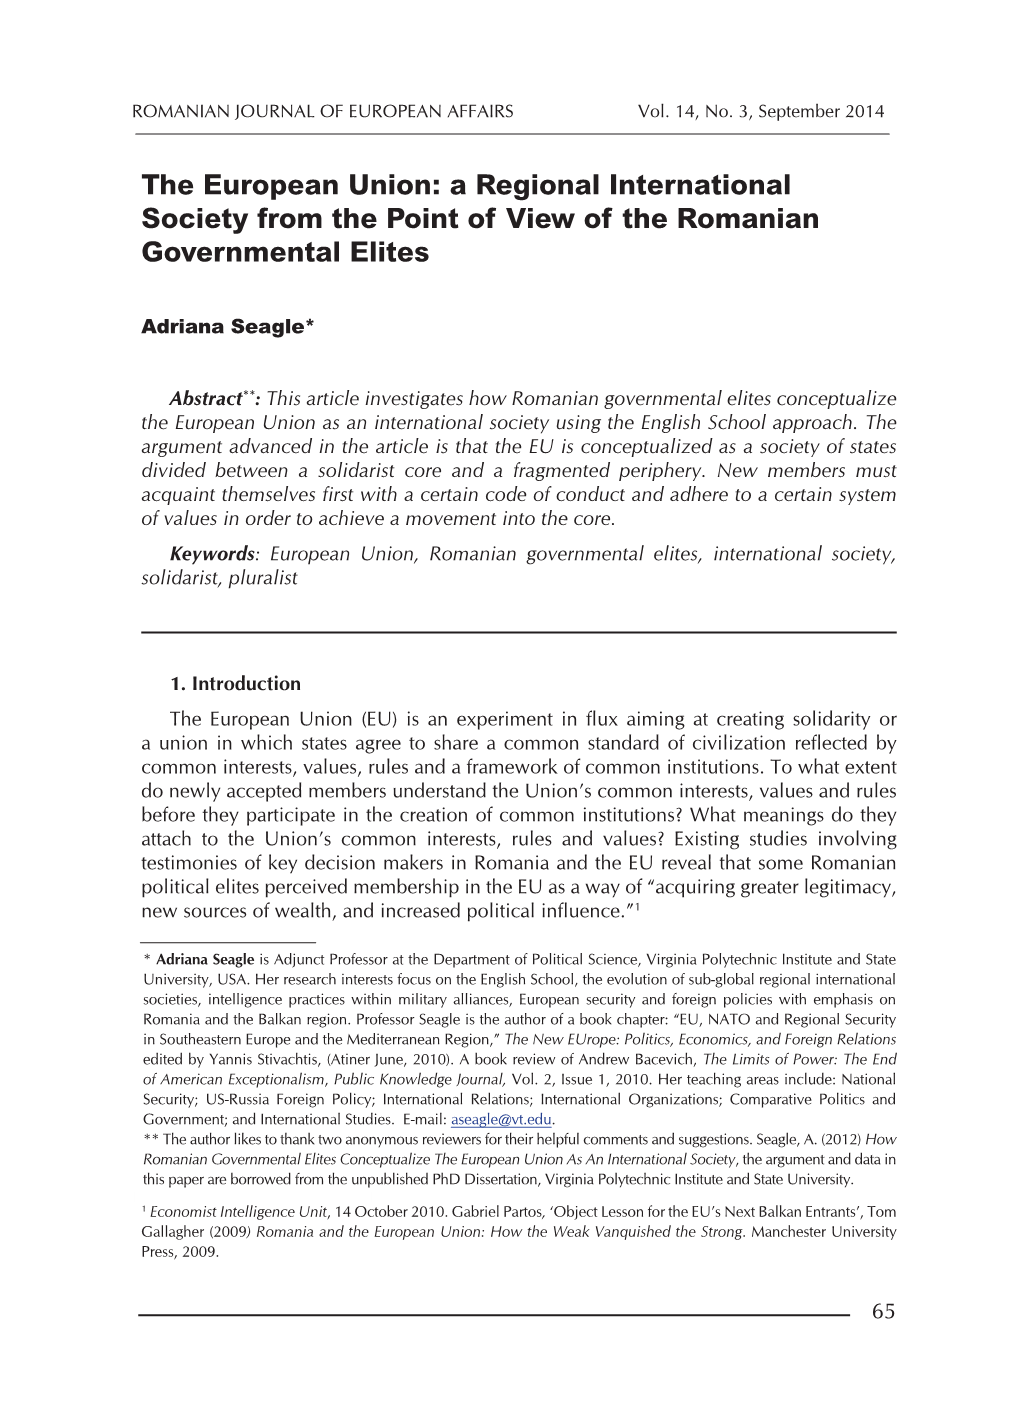 The European Union: a Regional International Society from the Point of View of the Romanian Governmental Elites